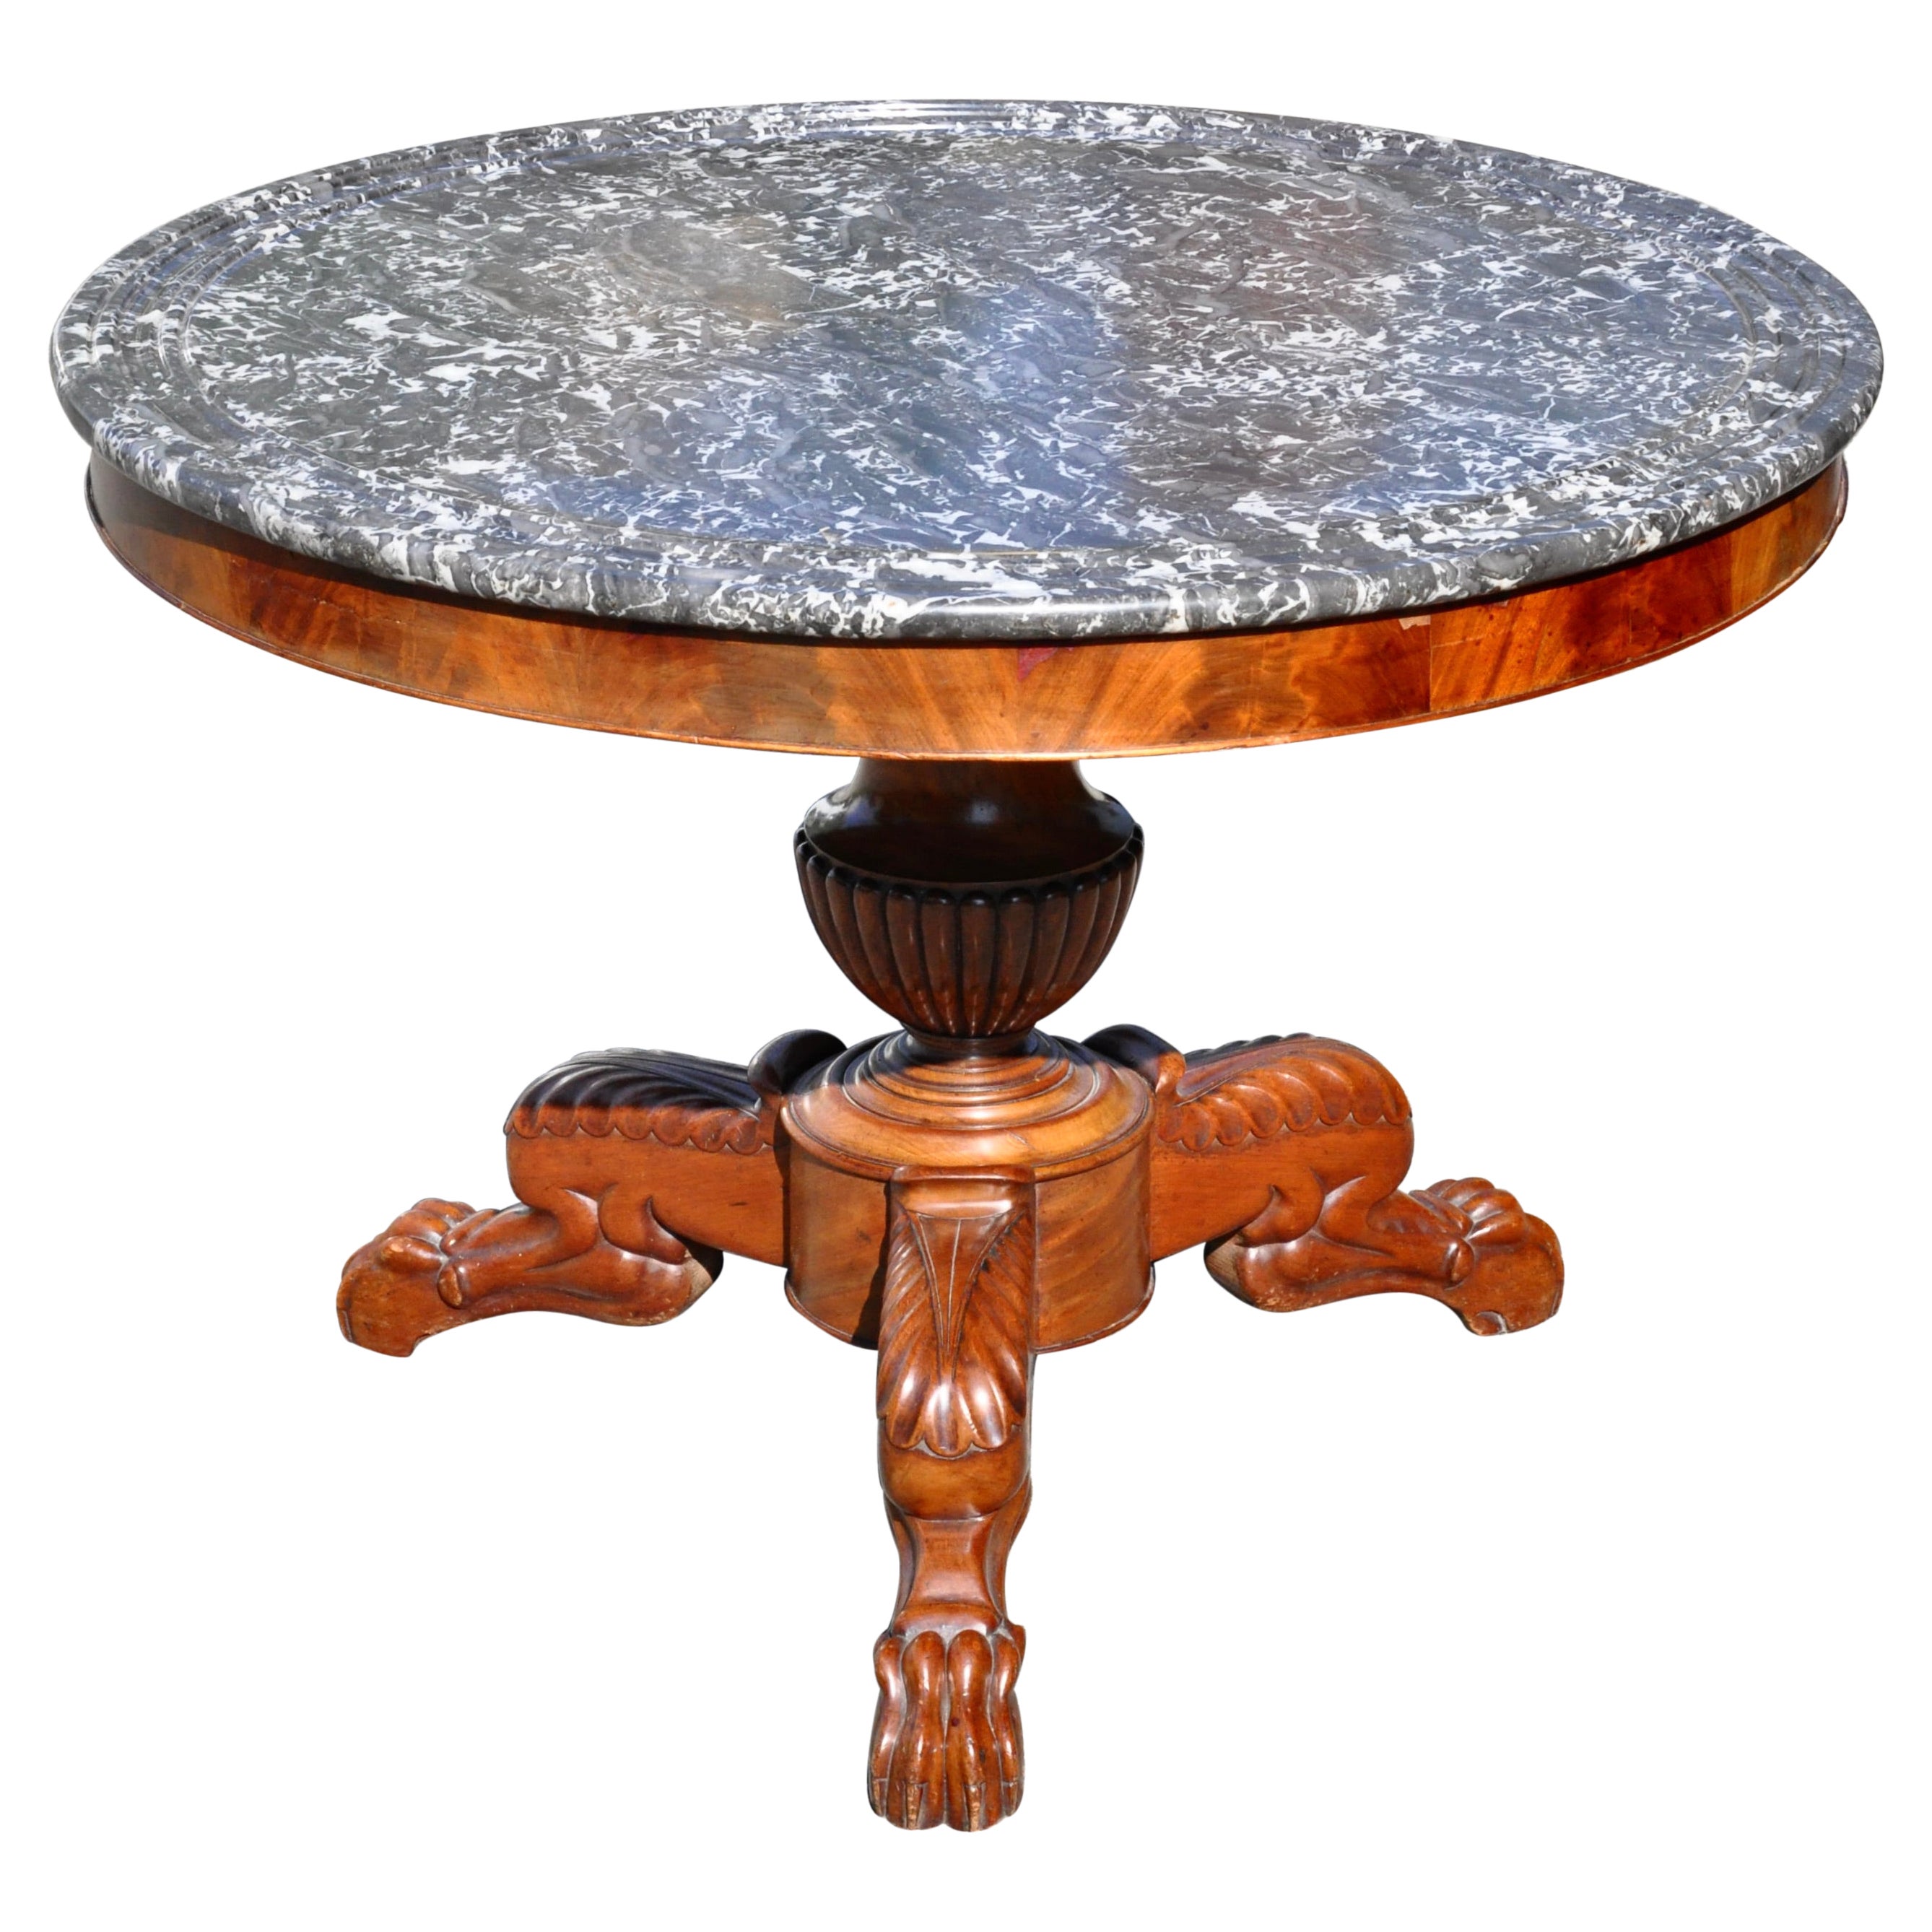 Early 19th Century French Marble Top Center Table or Gueridon